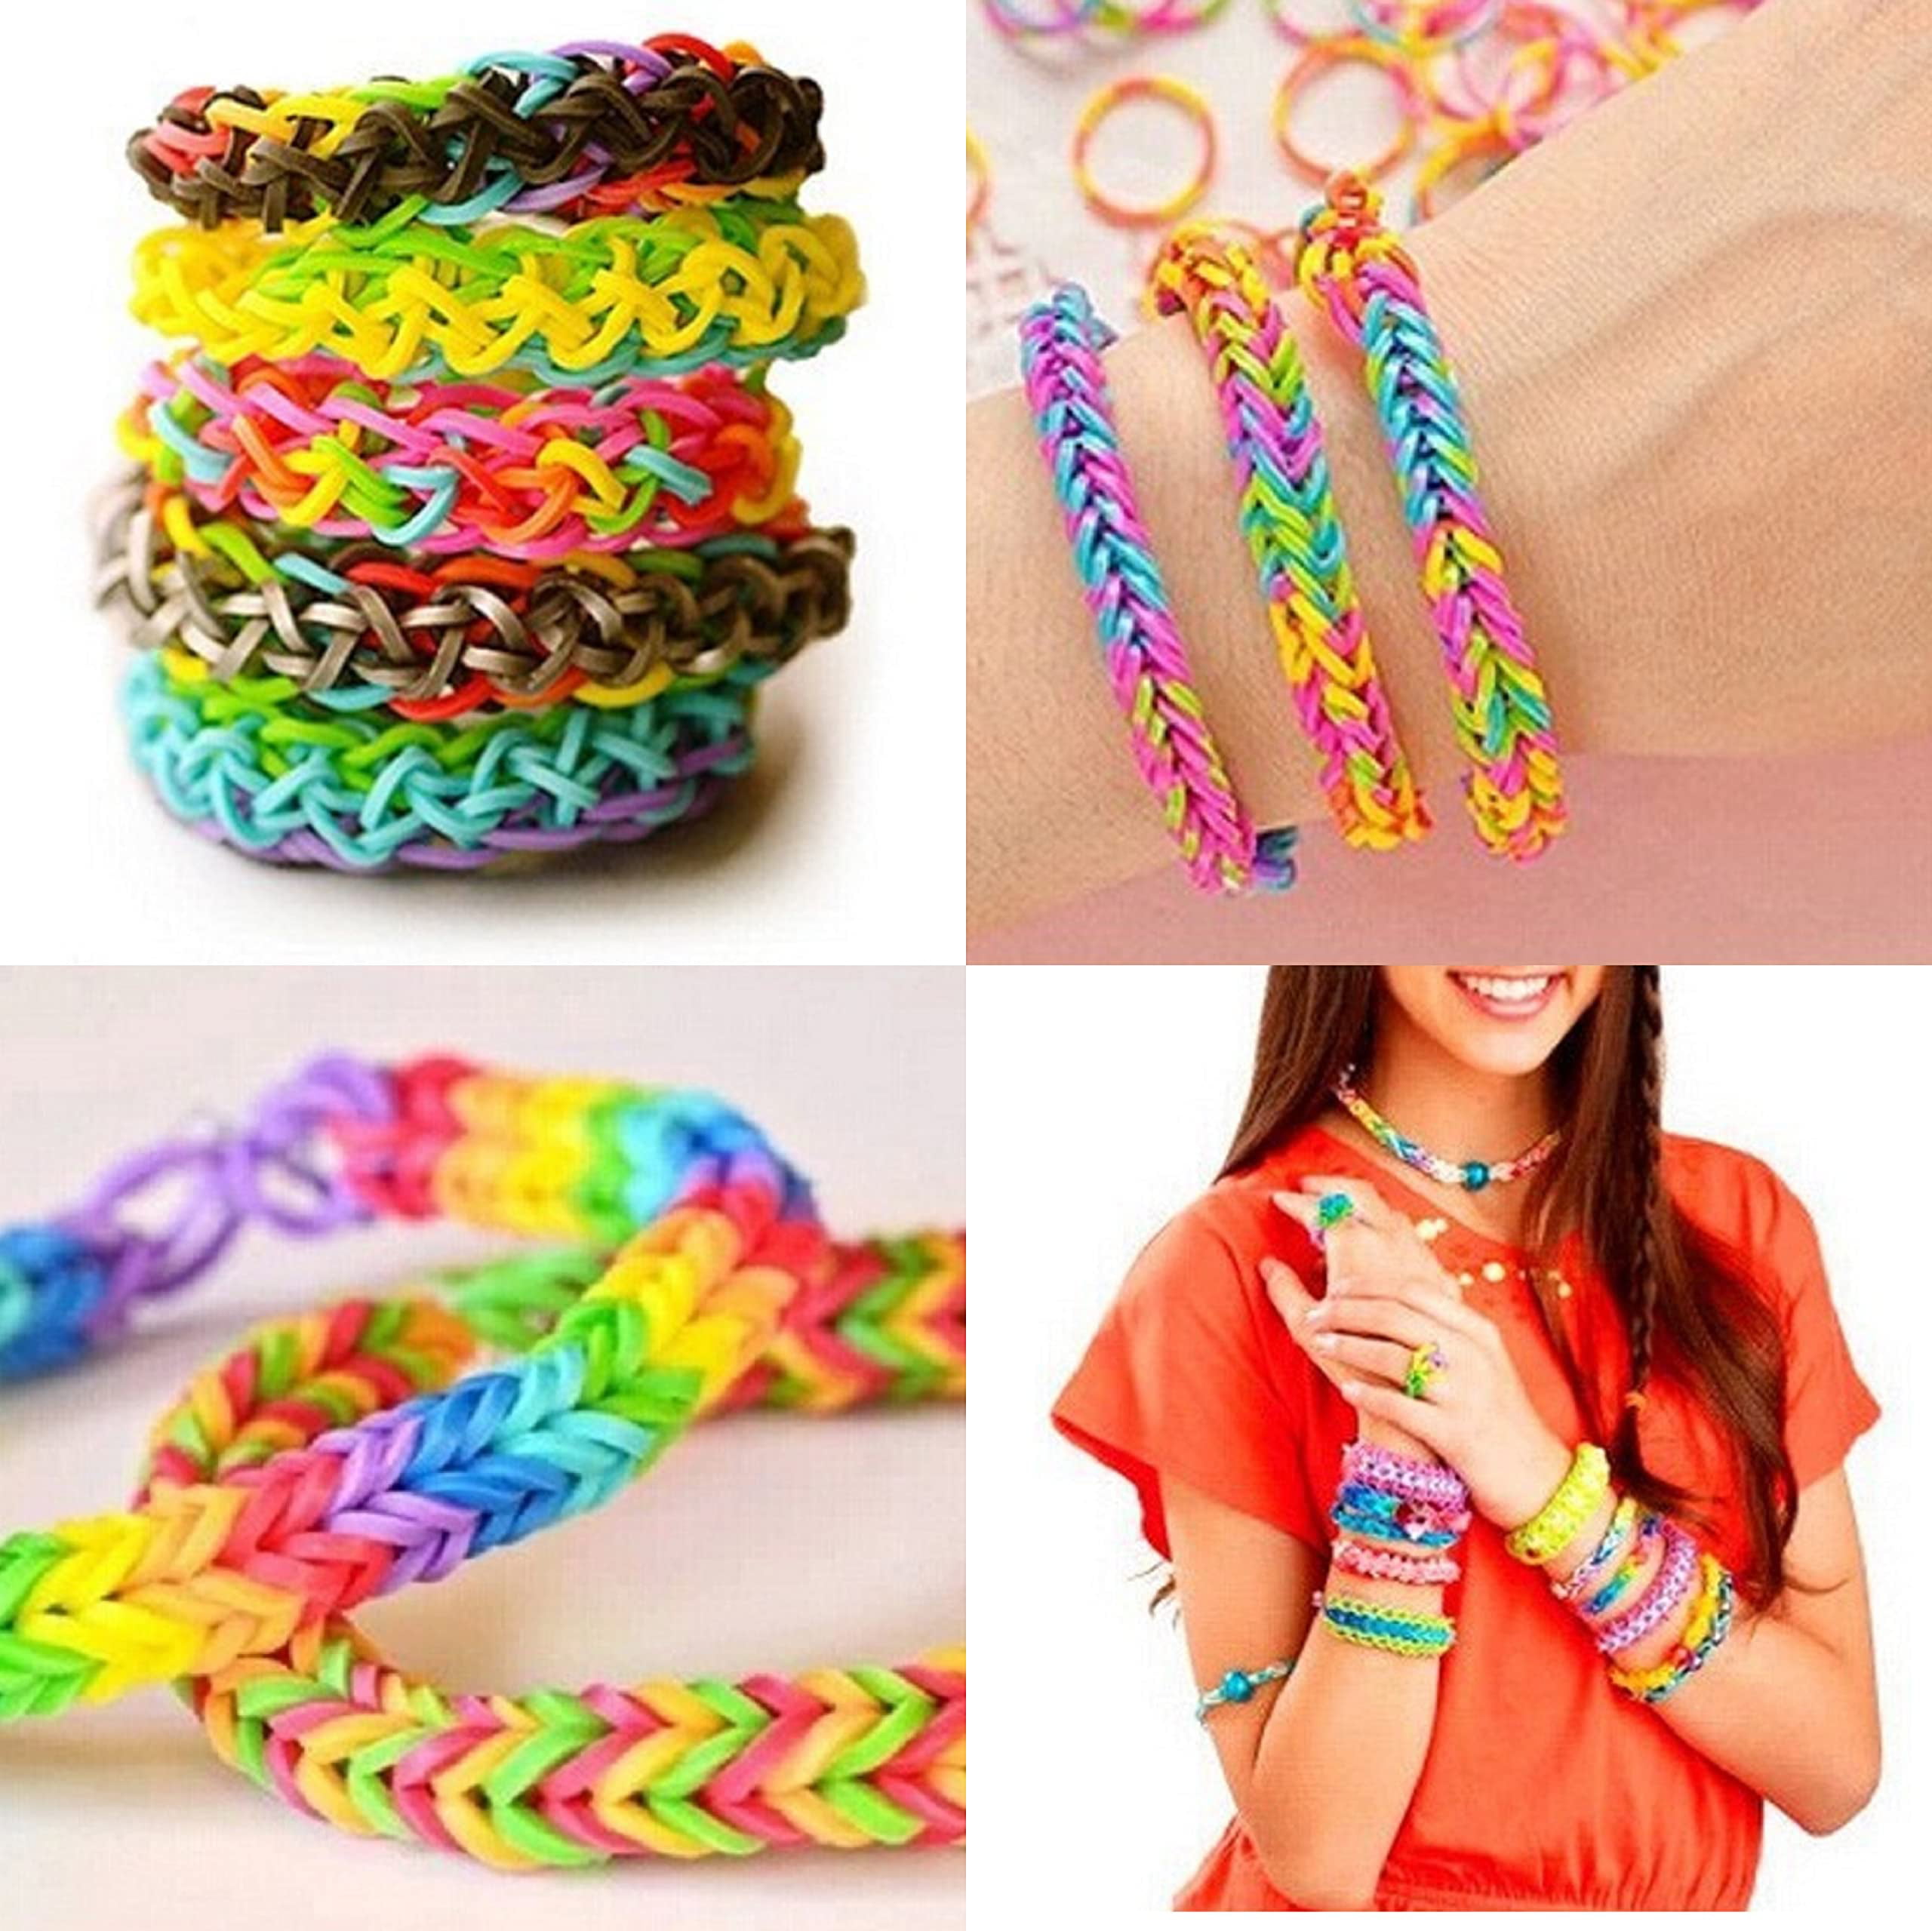 5400+ Colorful Rubber Bands Refill Set Includes: 4800+ Premium Quality Loom Rubber Bands in 12 Unique Colors + 300 S-Clips + 15 Lovely Charms + 6